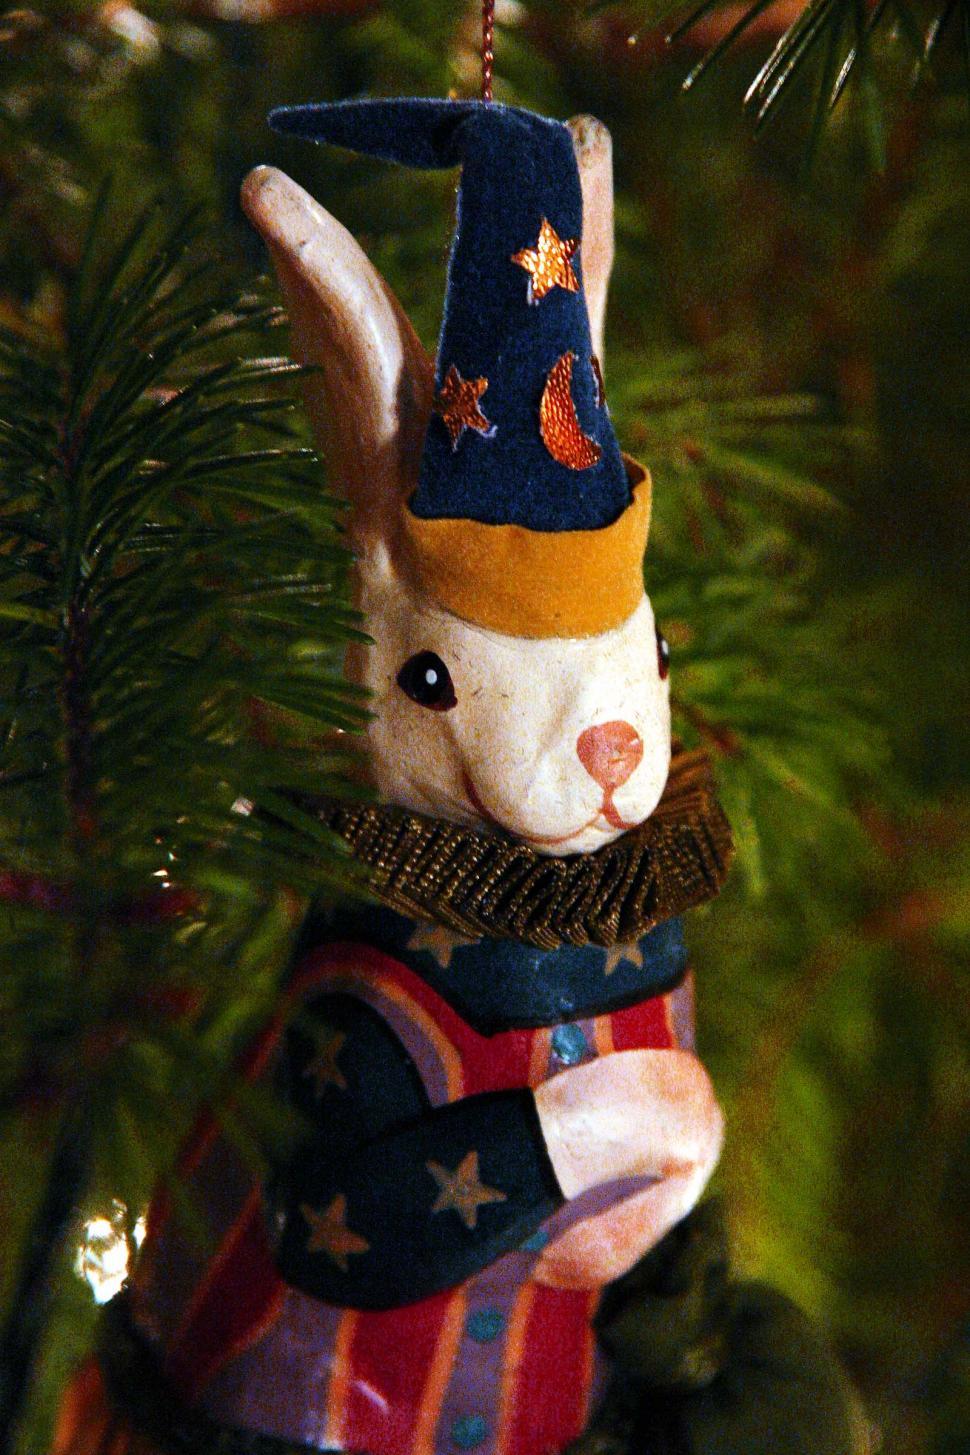 Free Image of Rabbit Ornament Hanging From a Christmas Tree 